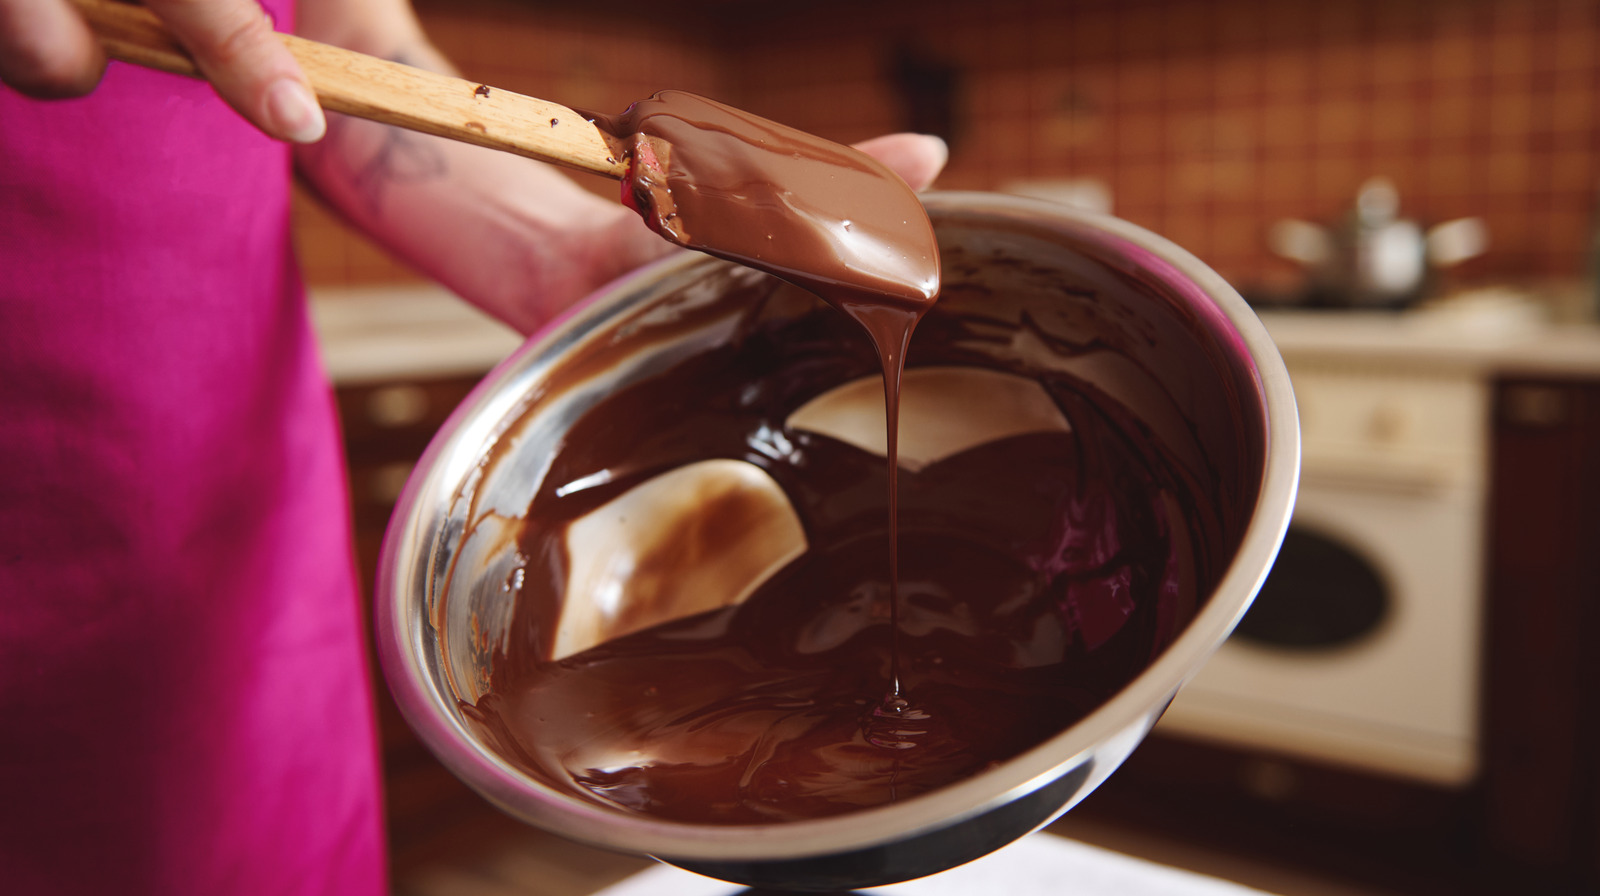 The Best Way to Temper Chocolate